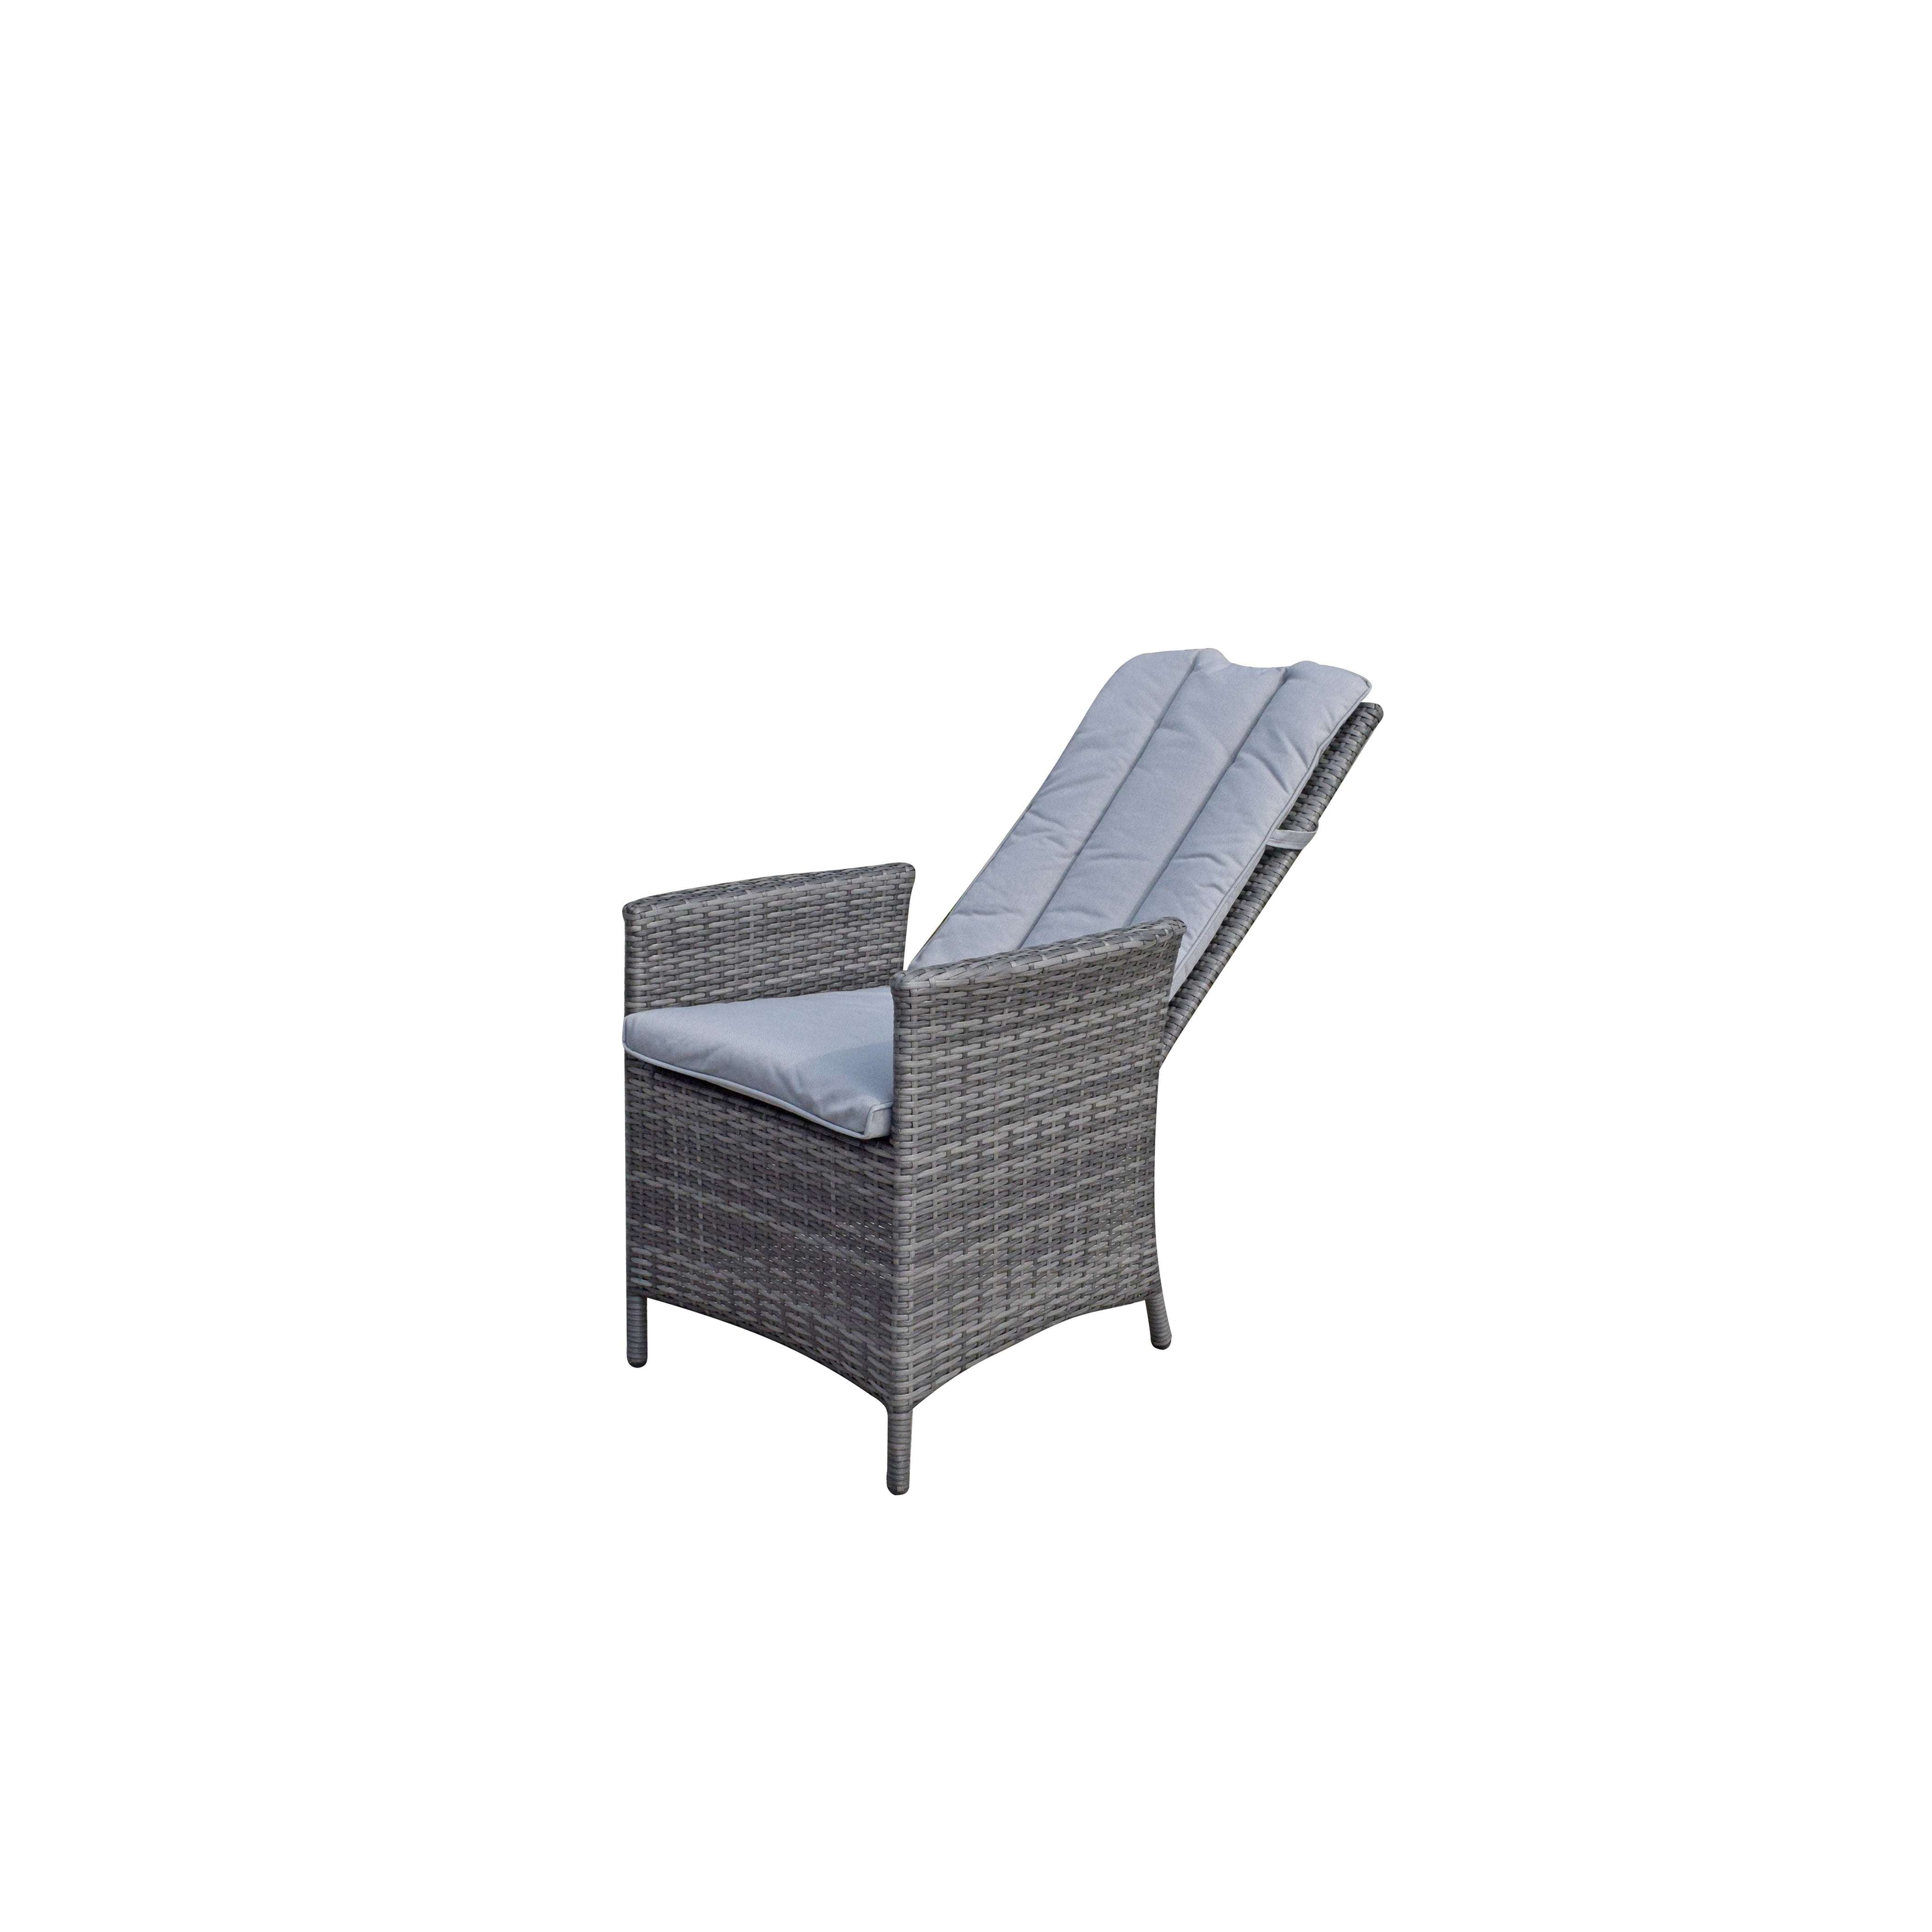 Exceptional Garden:Signature Weave Emily Reclining Dining Chairs